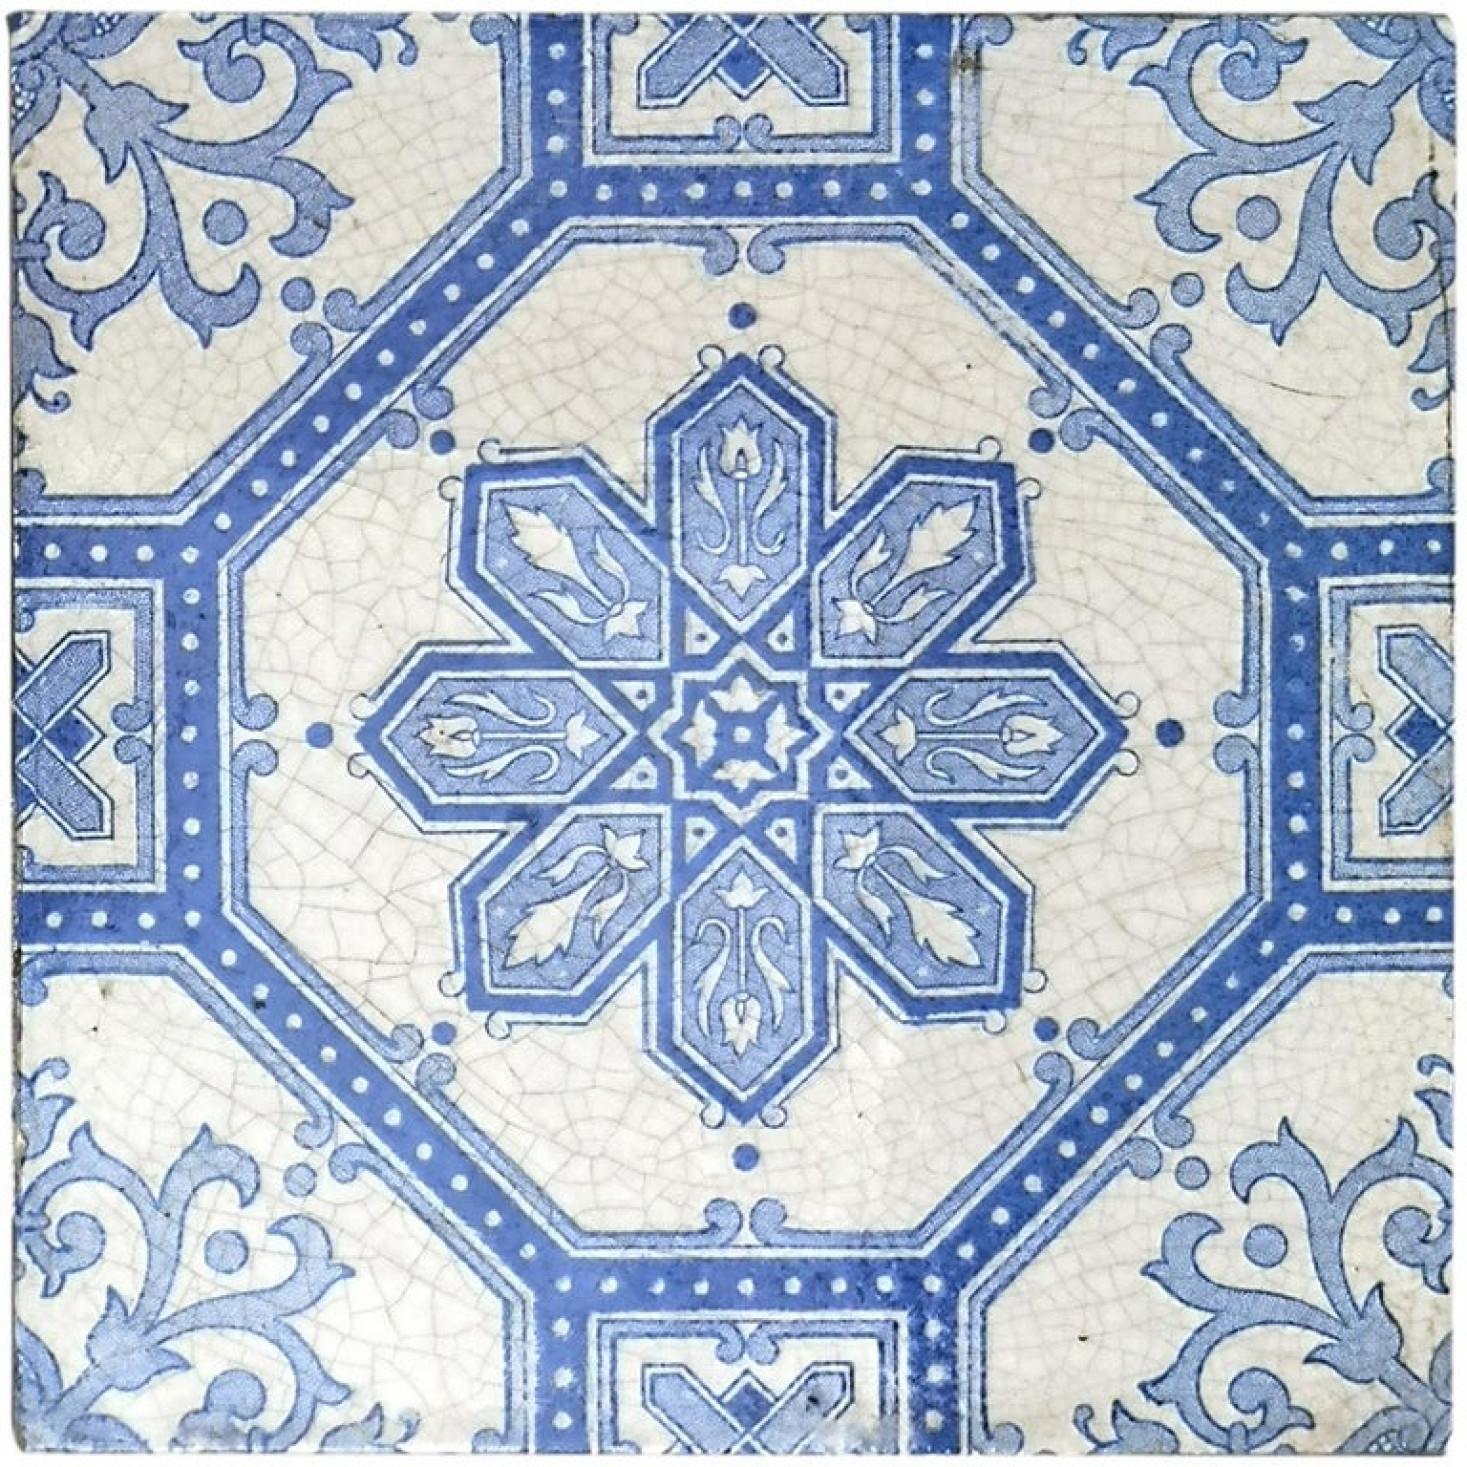 1 of the 100 glazed ceramic tiles tiles by Boch Freres, La Louvière, circa 1920's . Beautiful original cobalt blue and off-white tiles with a wonderful rich pattern.

The dimensions per tile are: 5.9 inch (15.2 cm) width x 5.9 inch (15.2 cm)